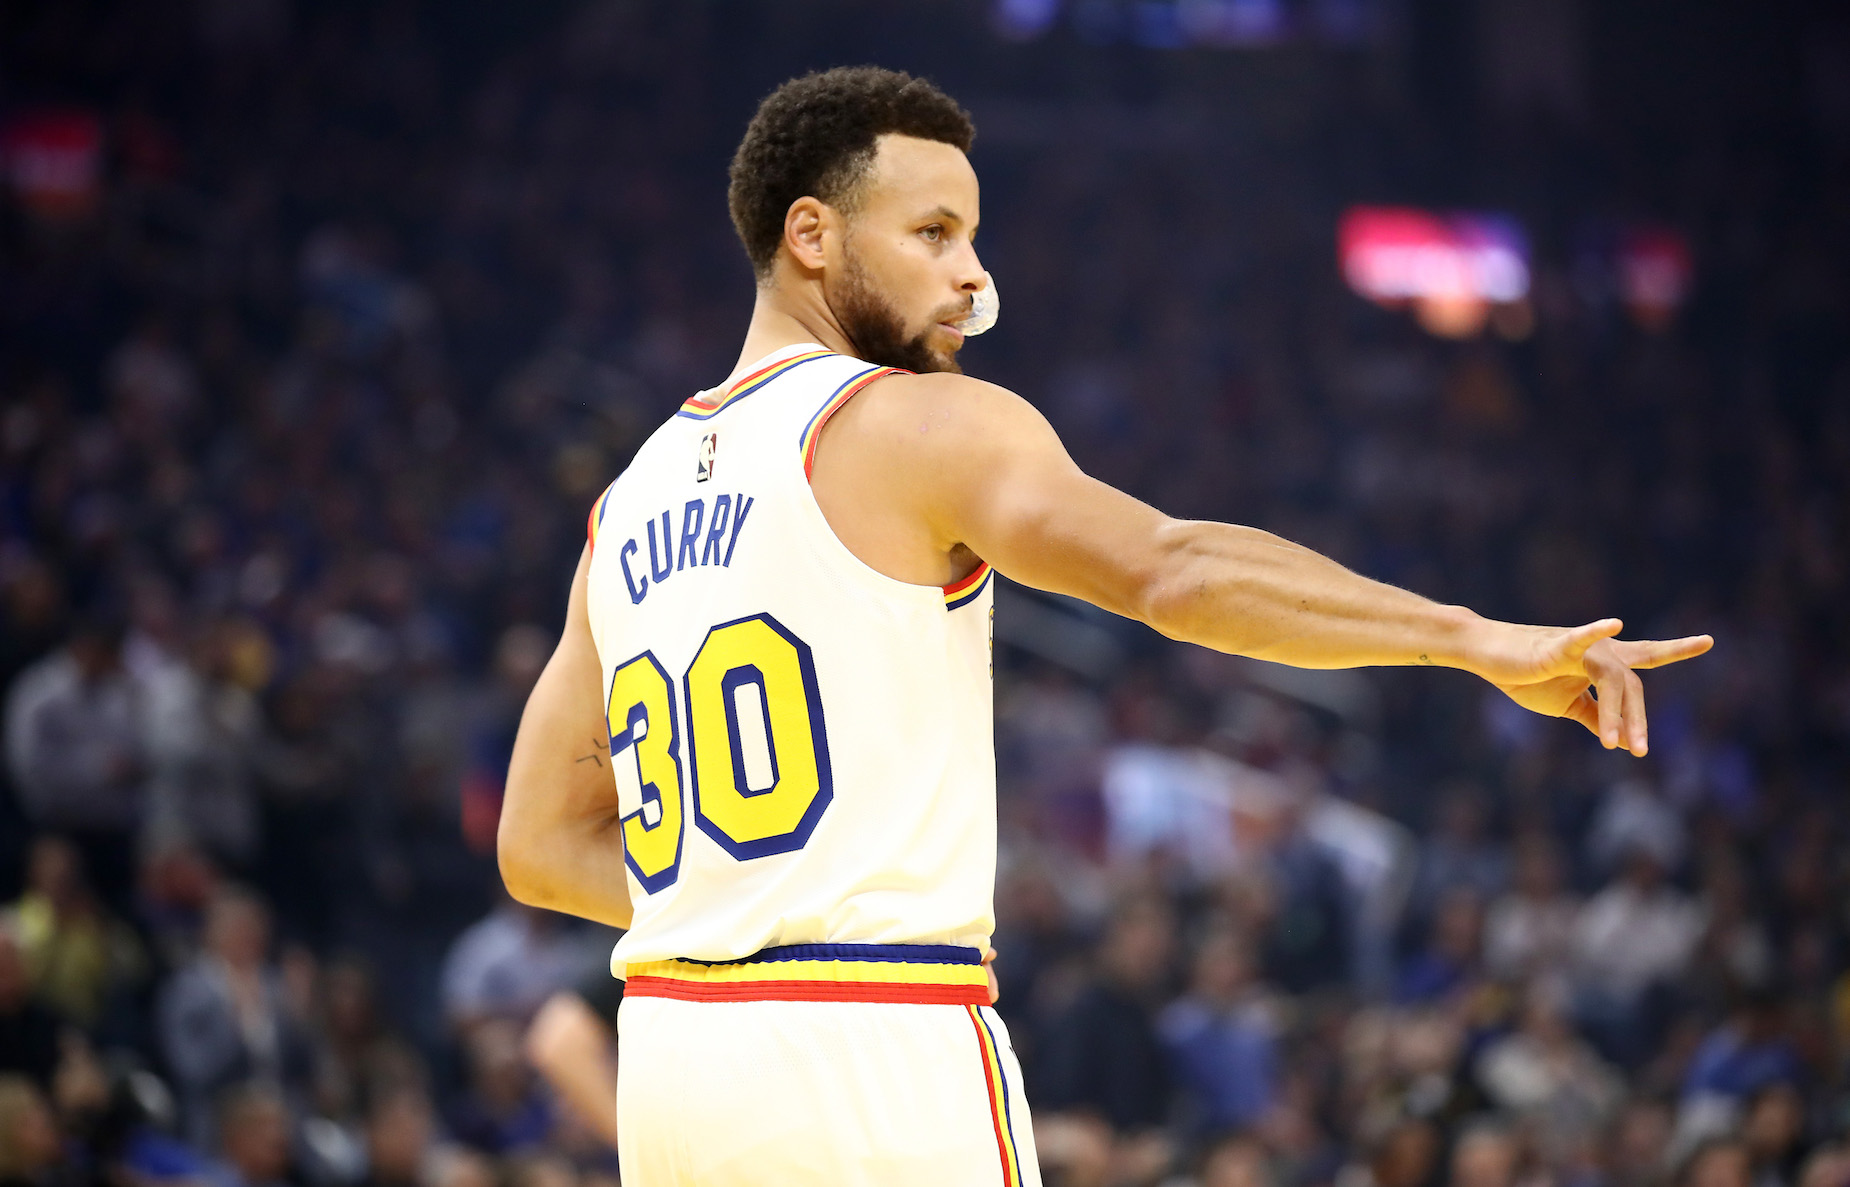 The Golden State Warriors recently got some draft advice from Steph Curry.